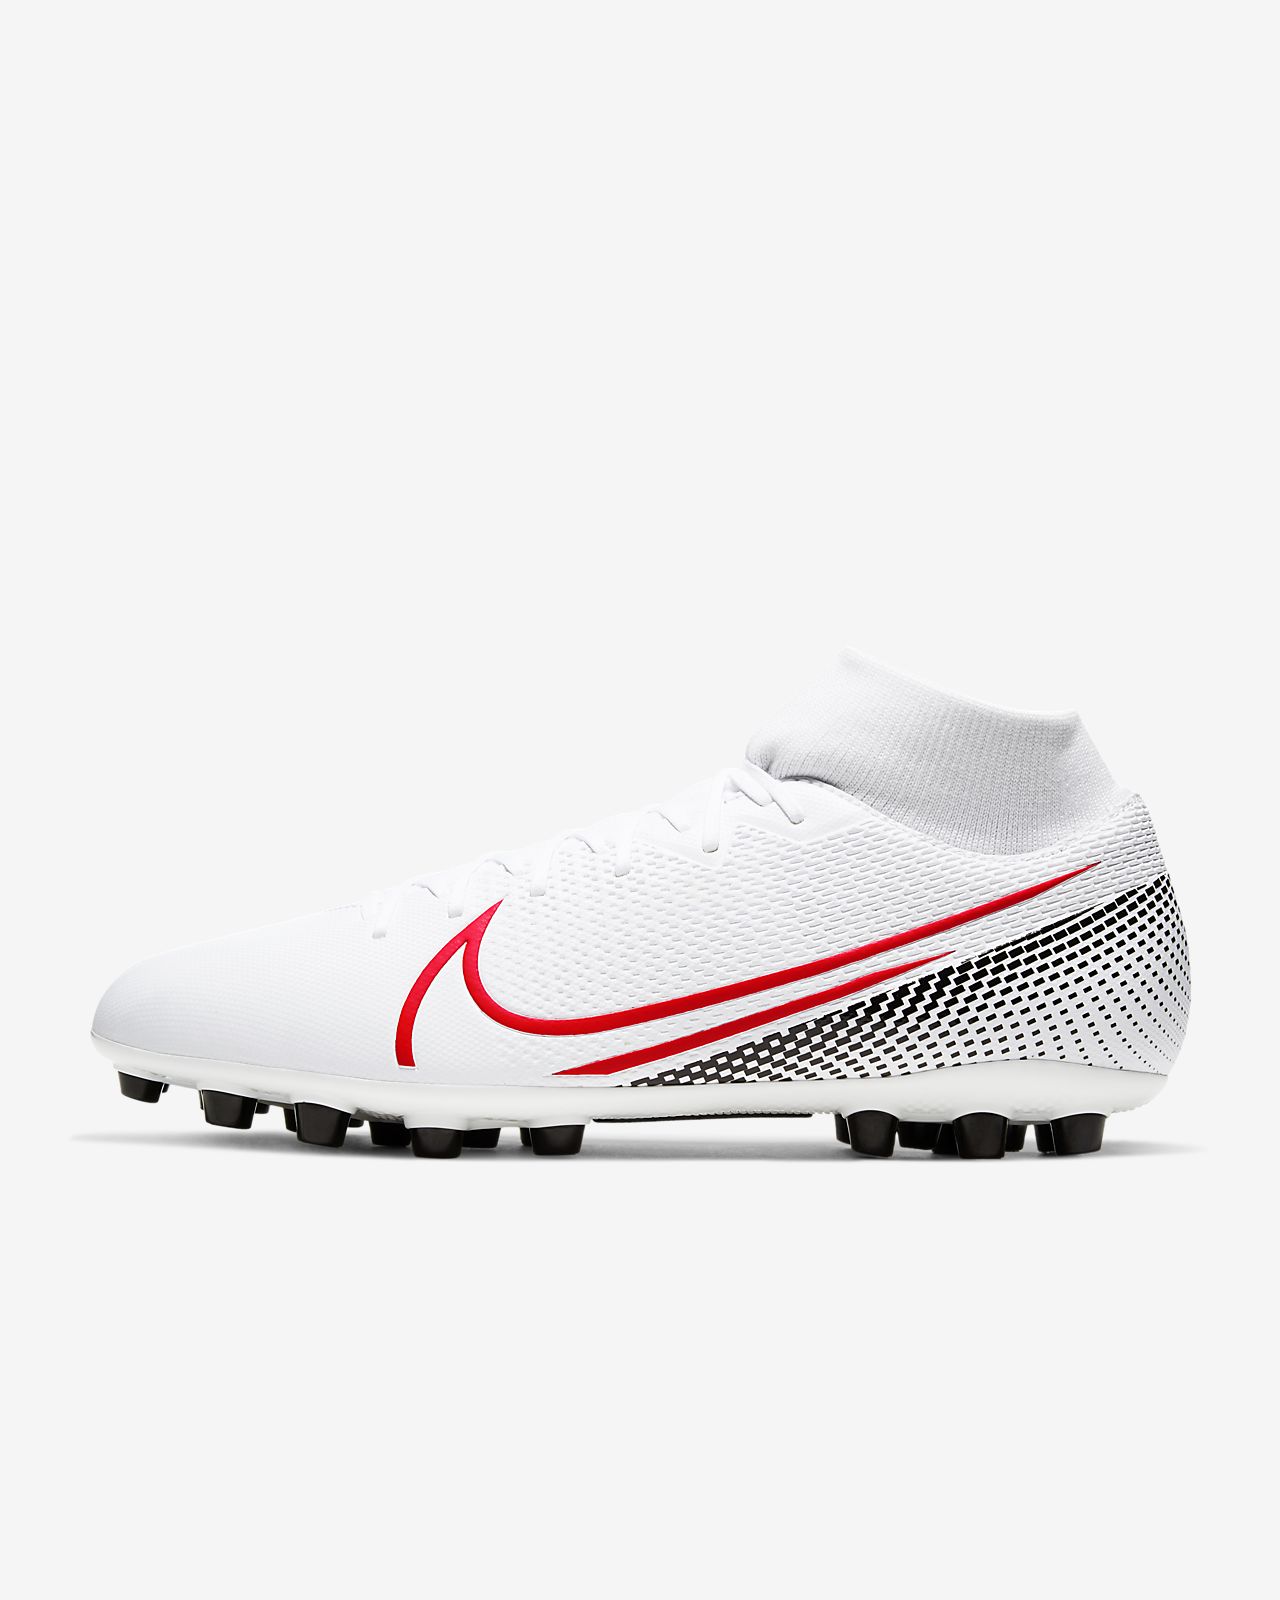 NIKE JR. SUPERFLY VI ACADEMY IC YOUTH INDOOR.